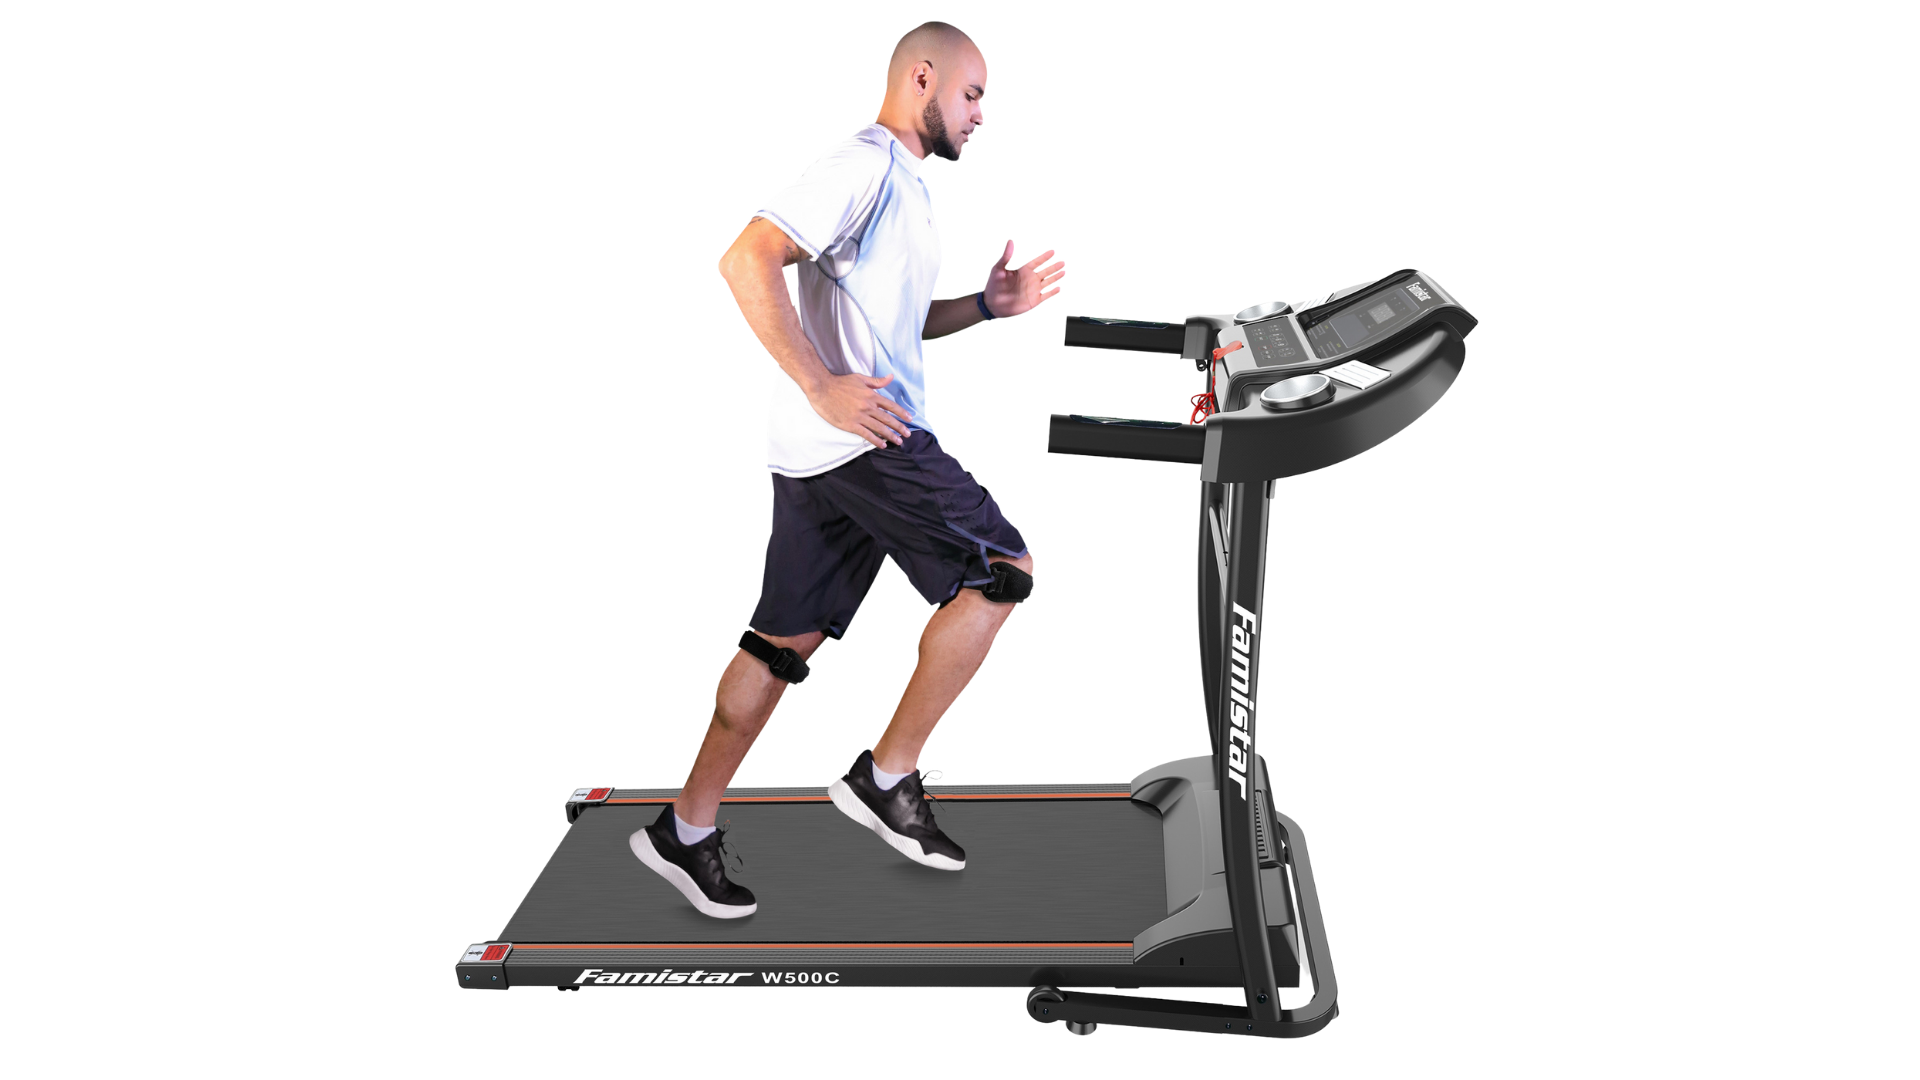 Mauccau Treadmills for Home Small Folding Lightweight Electric Treadmill with LCD Monitor & Pulse Grip & Safe Key Portable Compact Walking Running Machine for Apartment Office 